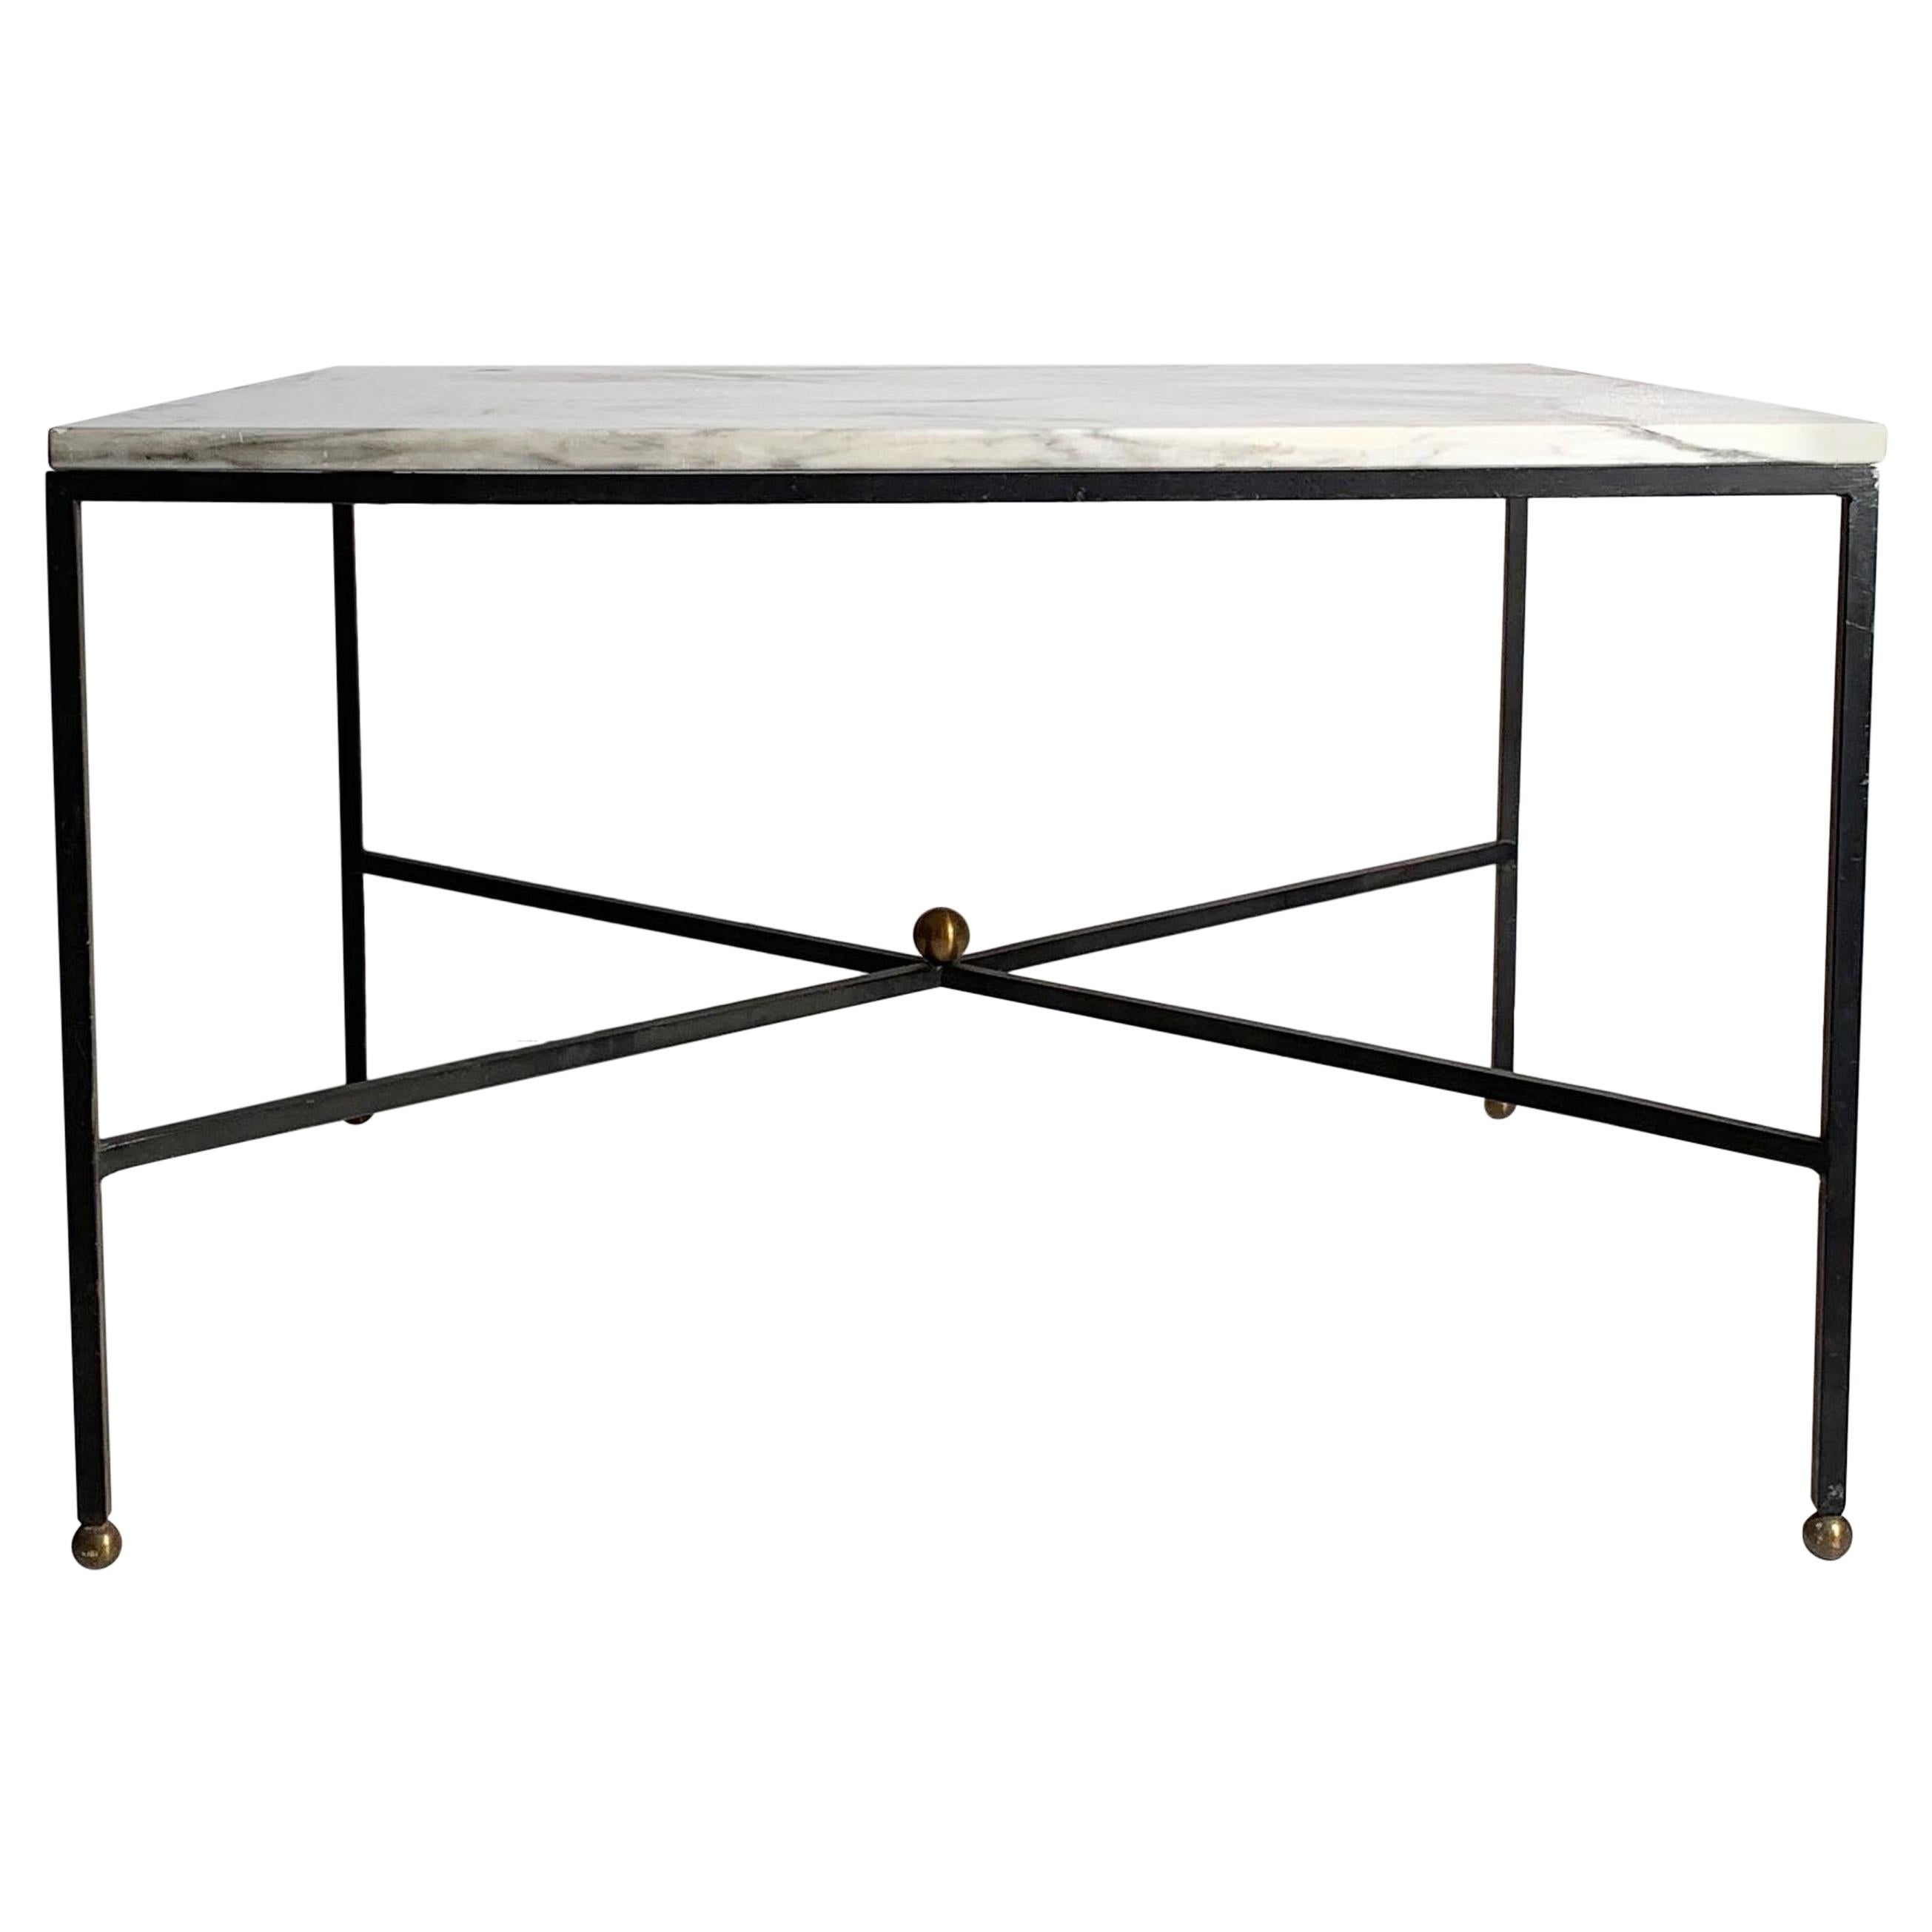 Elegant Architectural Mid-Century Modern Italian Iron and Marble Coffee Table